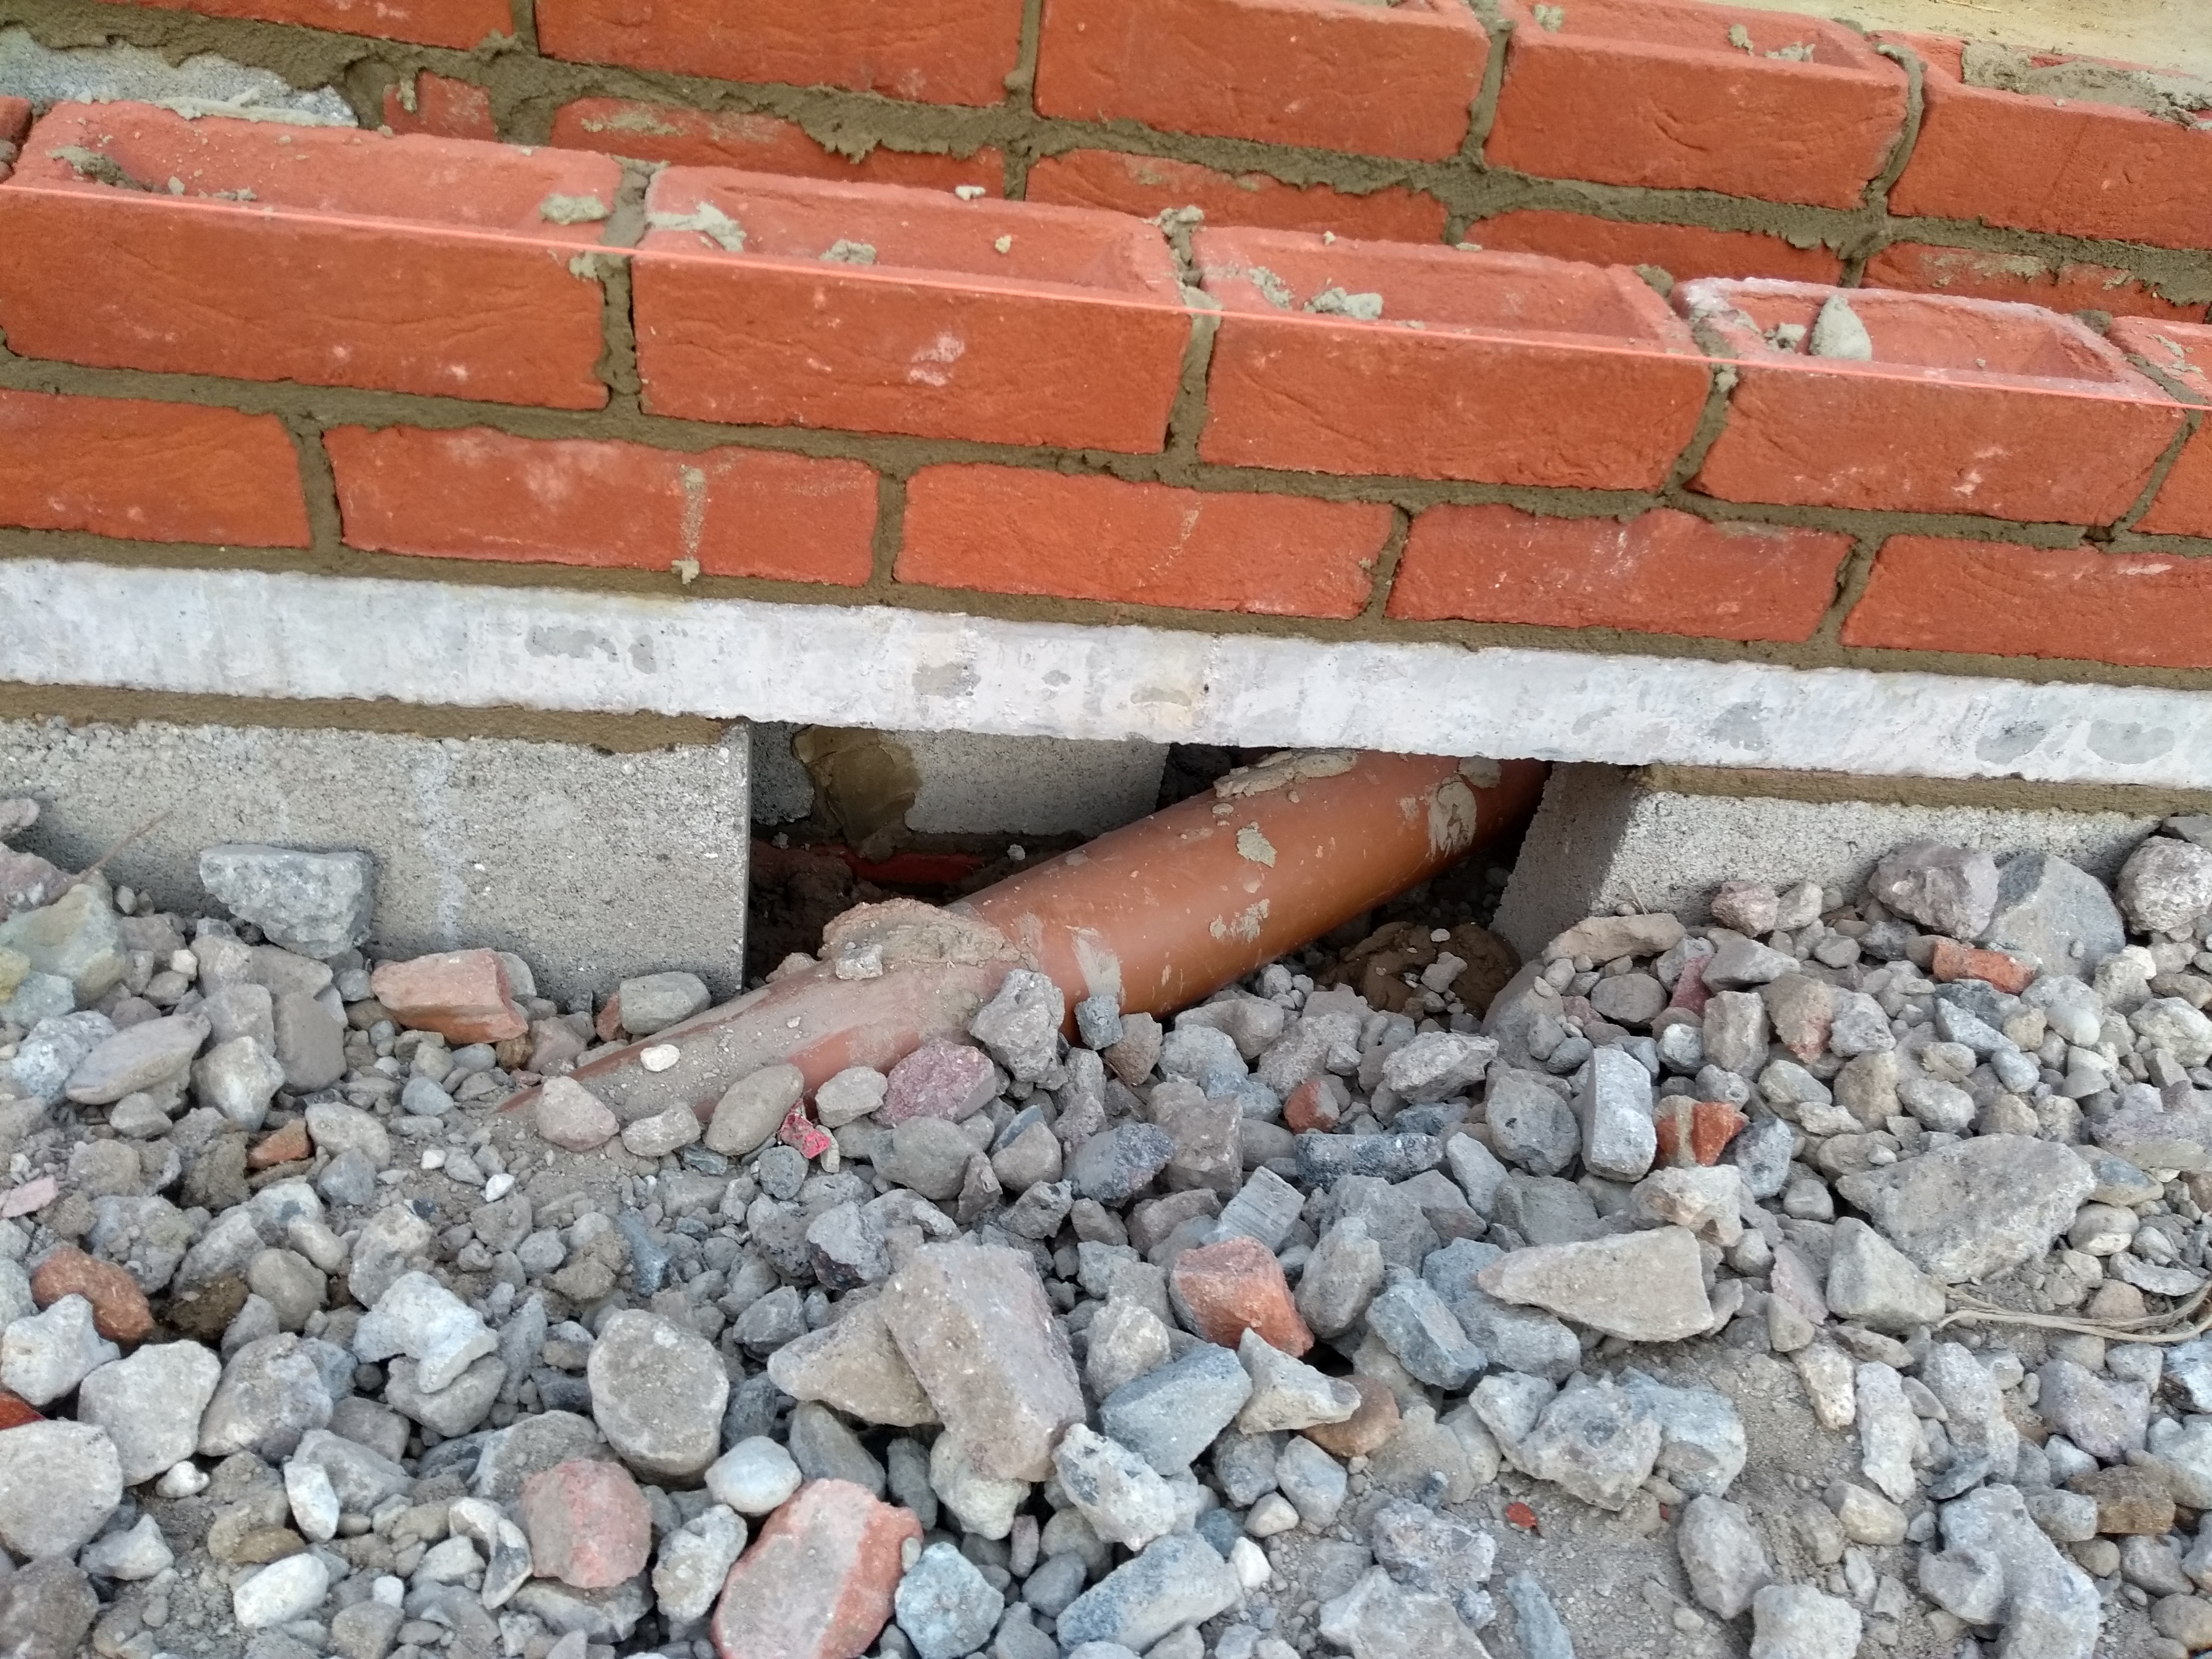 Soil vent pipe nicely protected